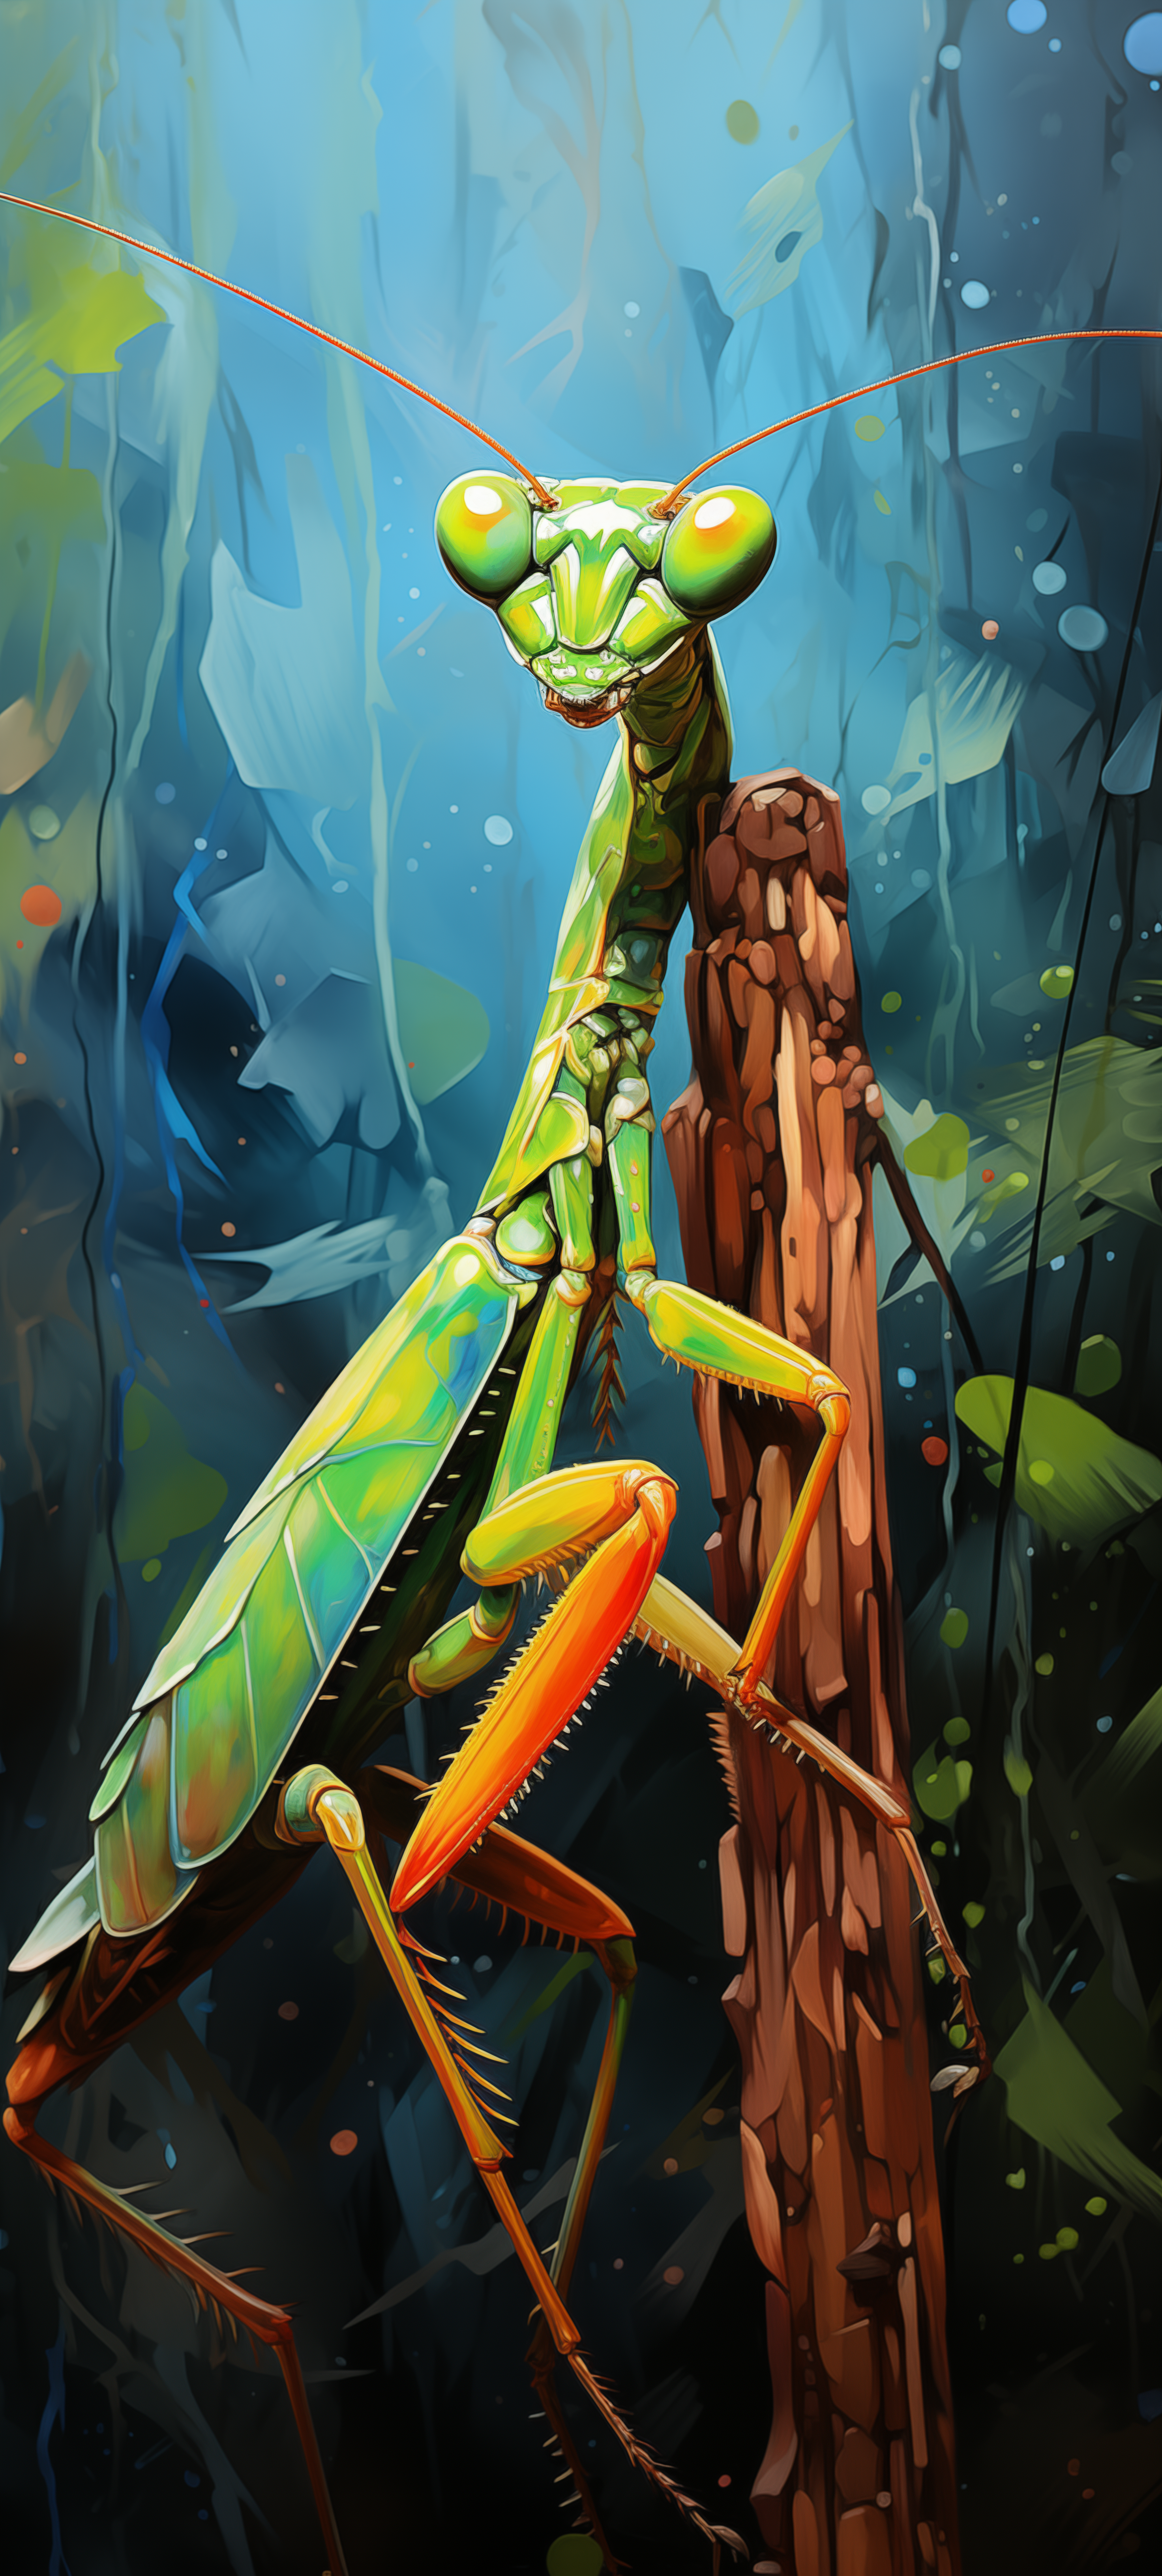 Colorful illustration of a praying mantis perched on a branch, designed as a phone wallpaper.